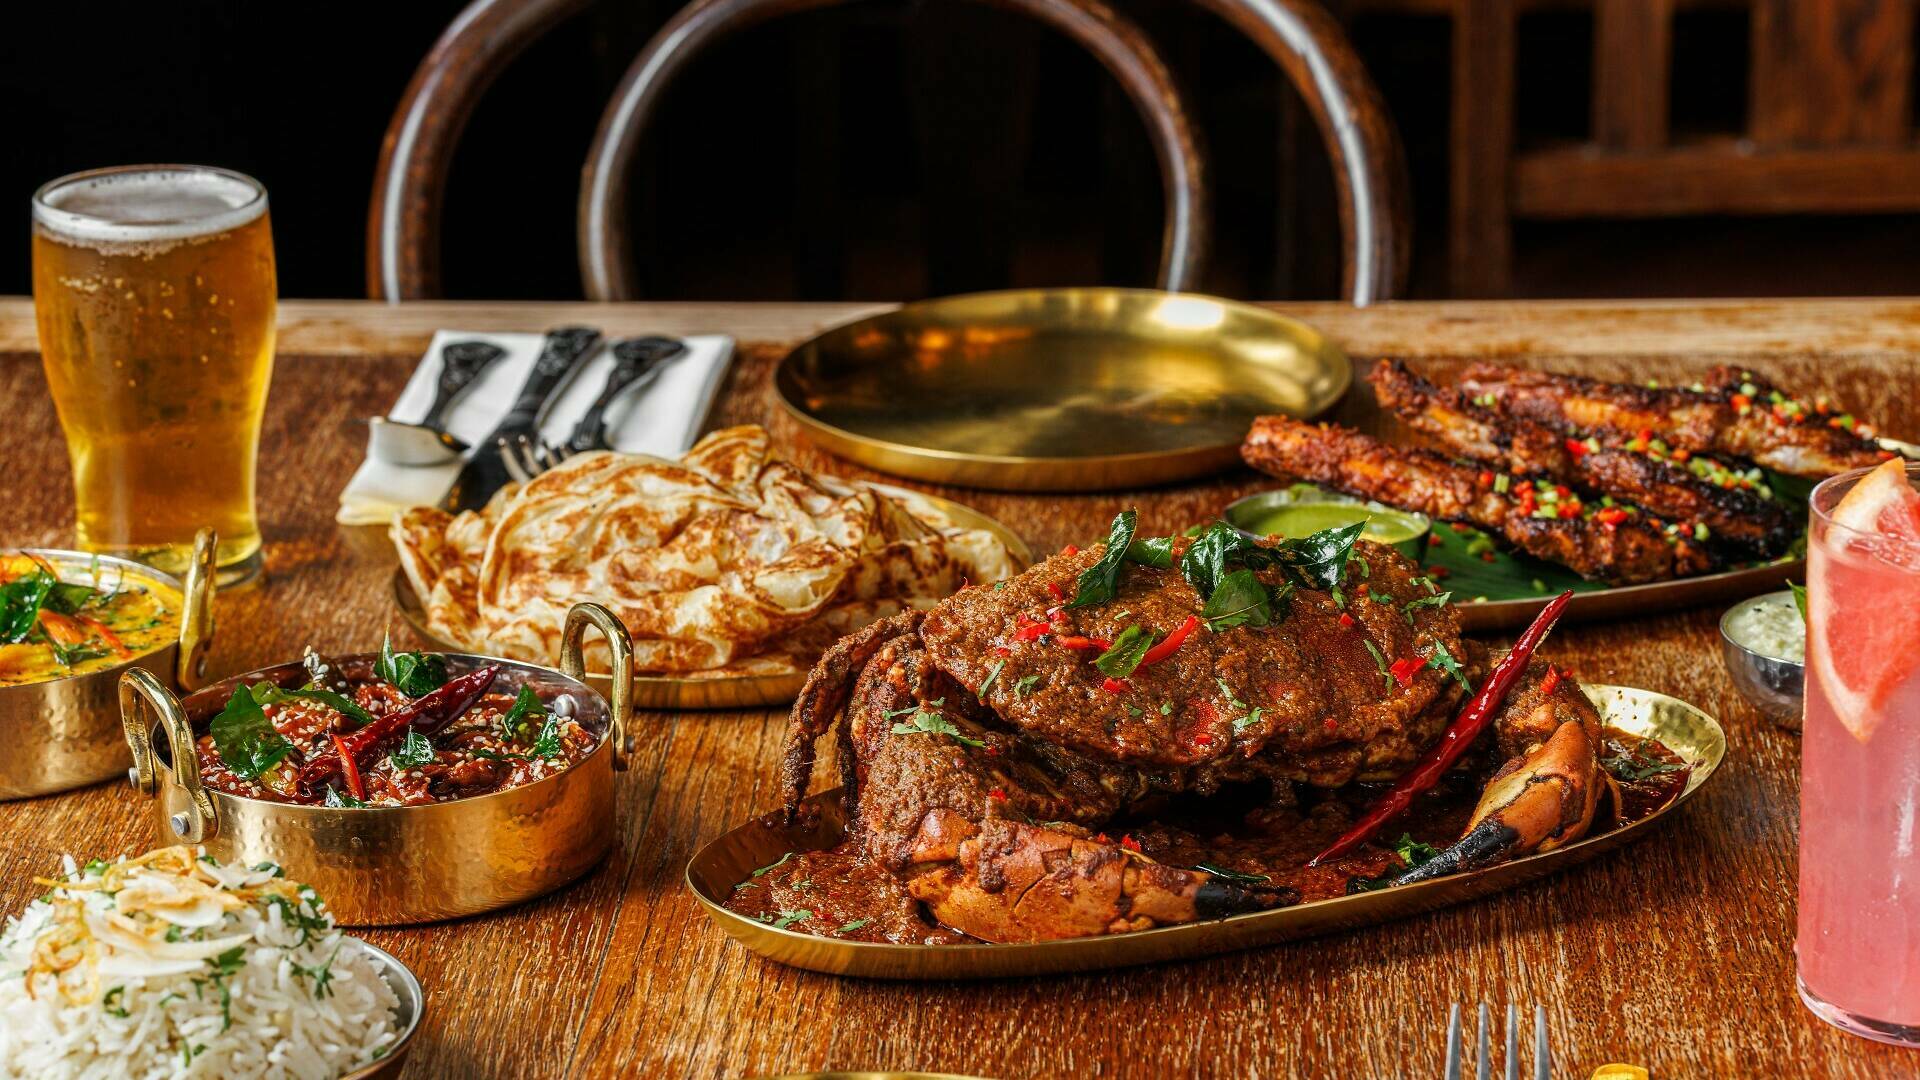 beloved-north-london-restaurant-the-tamil-prince-is-opening-a-new-pub-in-islington